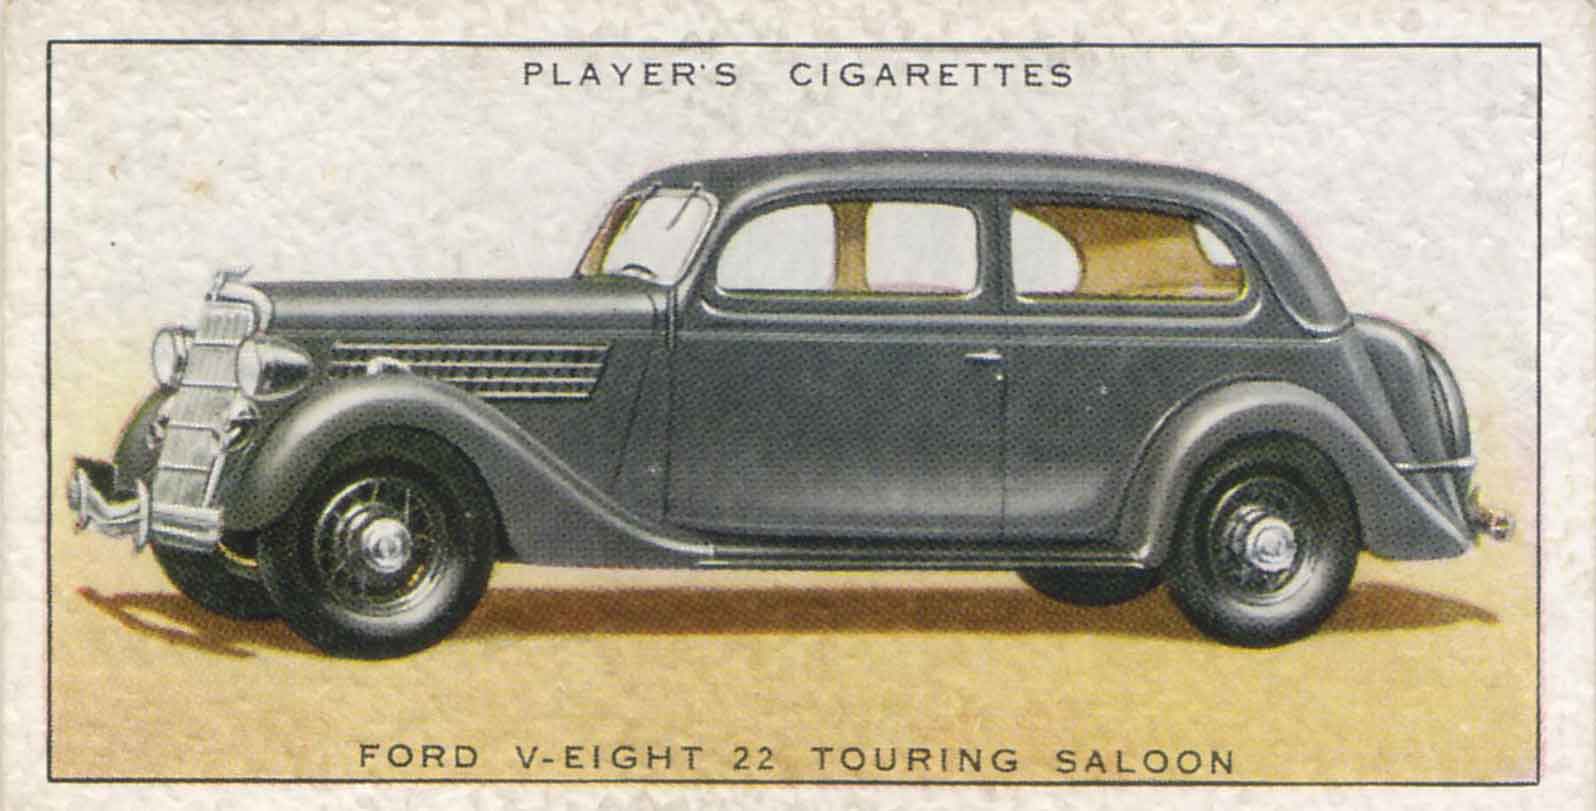 Ford V-Eight 22 Touring Saloon. 1937 cigarette card.